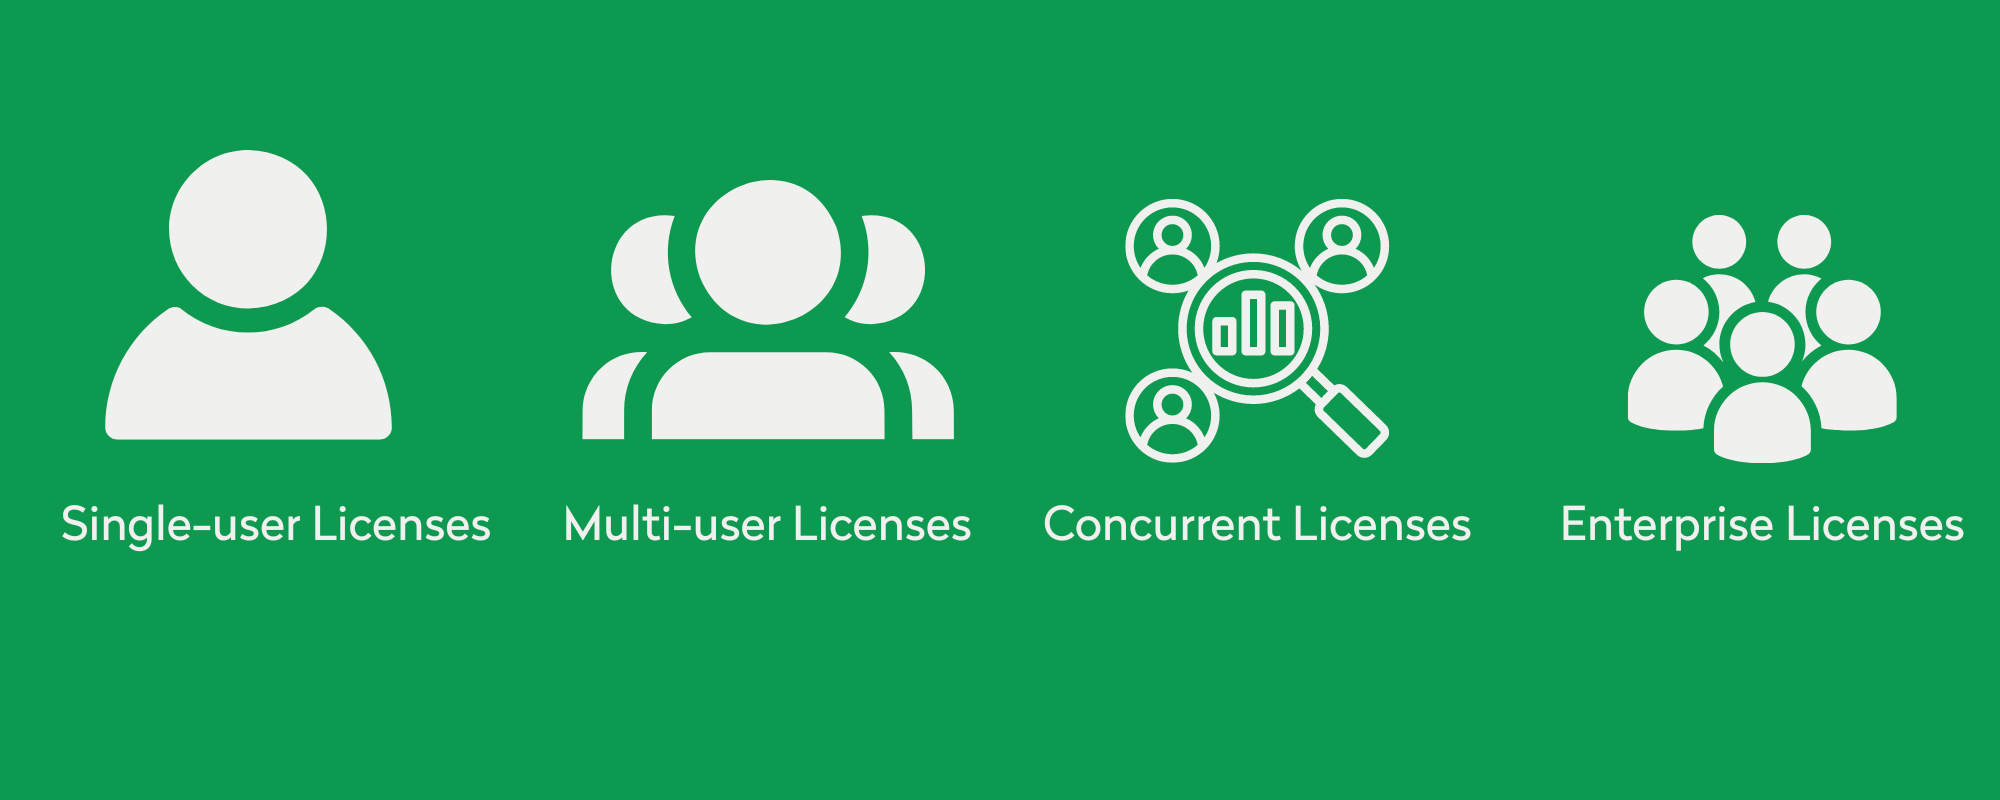 SaaS licenses infographic